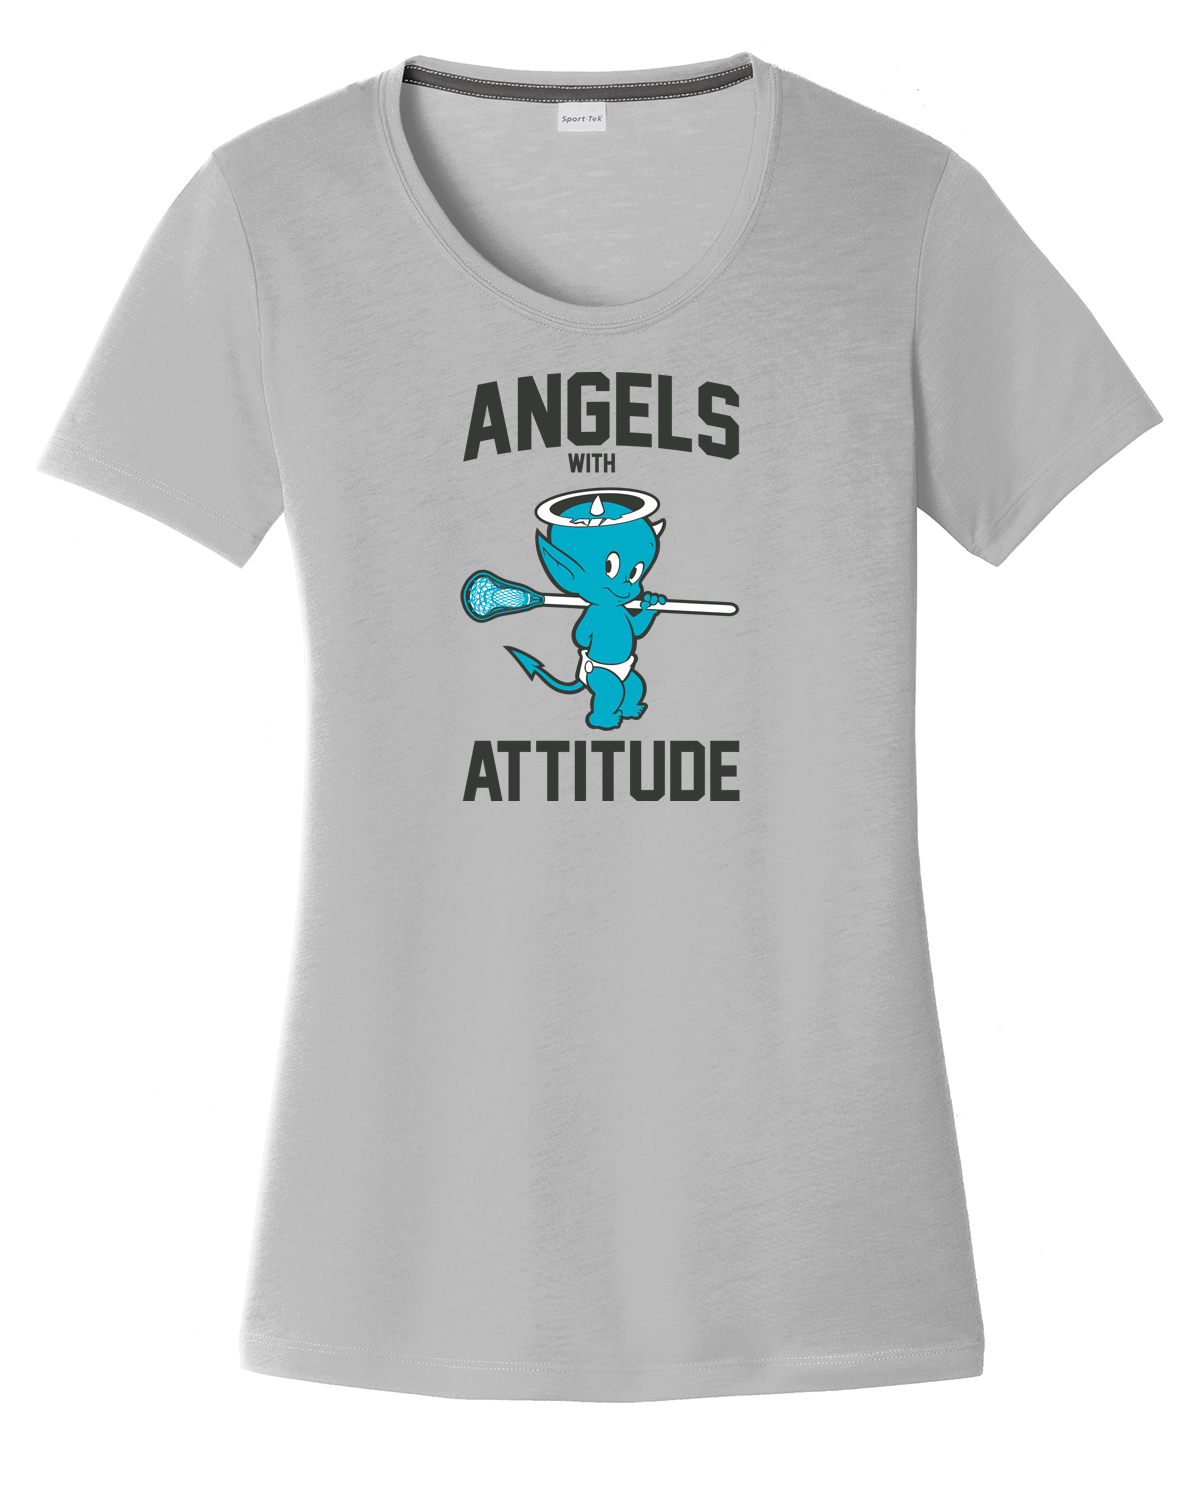 Angels With Attitude Women's CottonTouch Performance T-Shirt